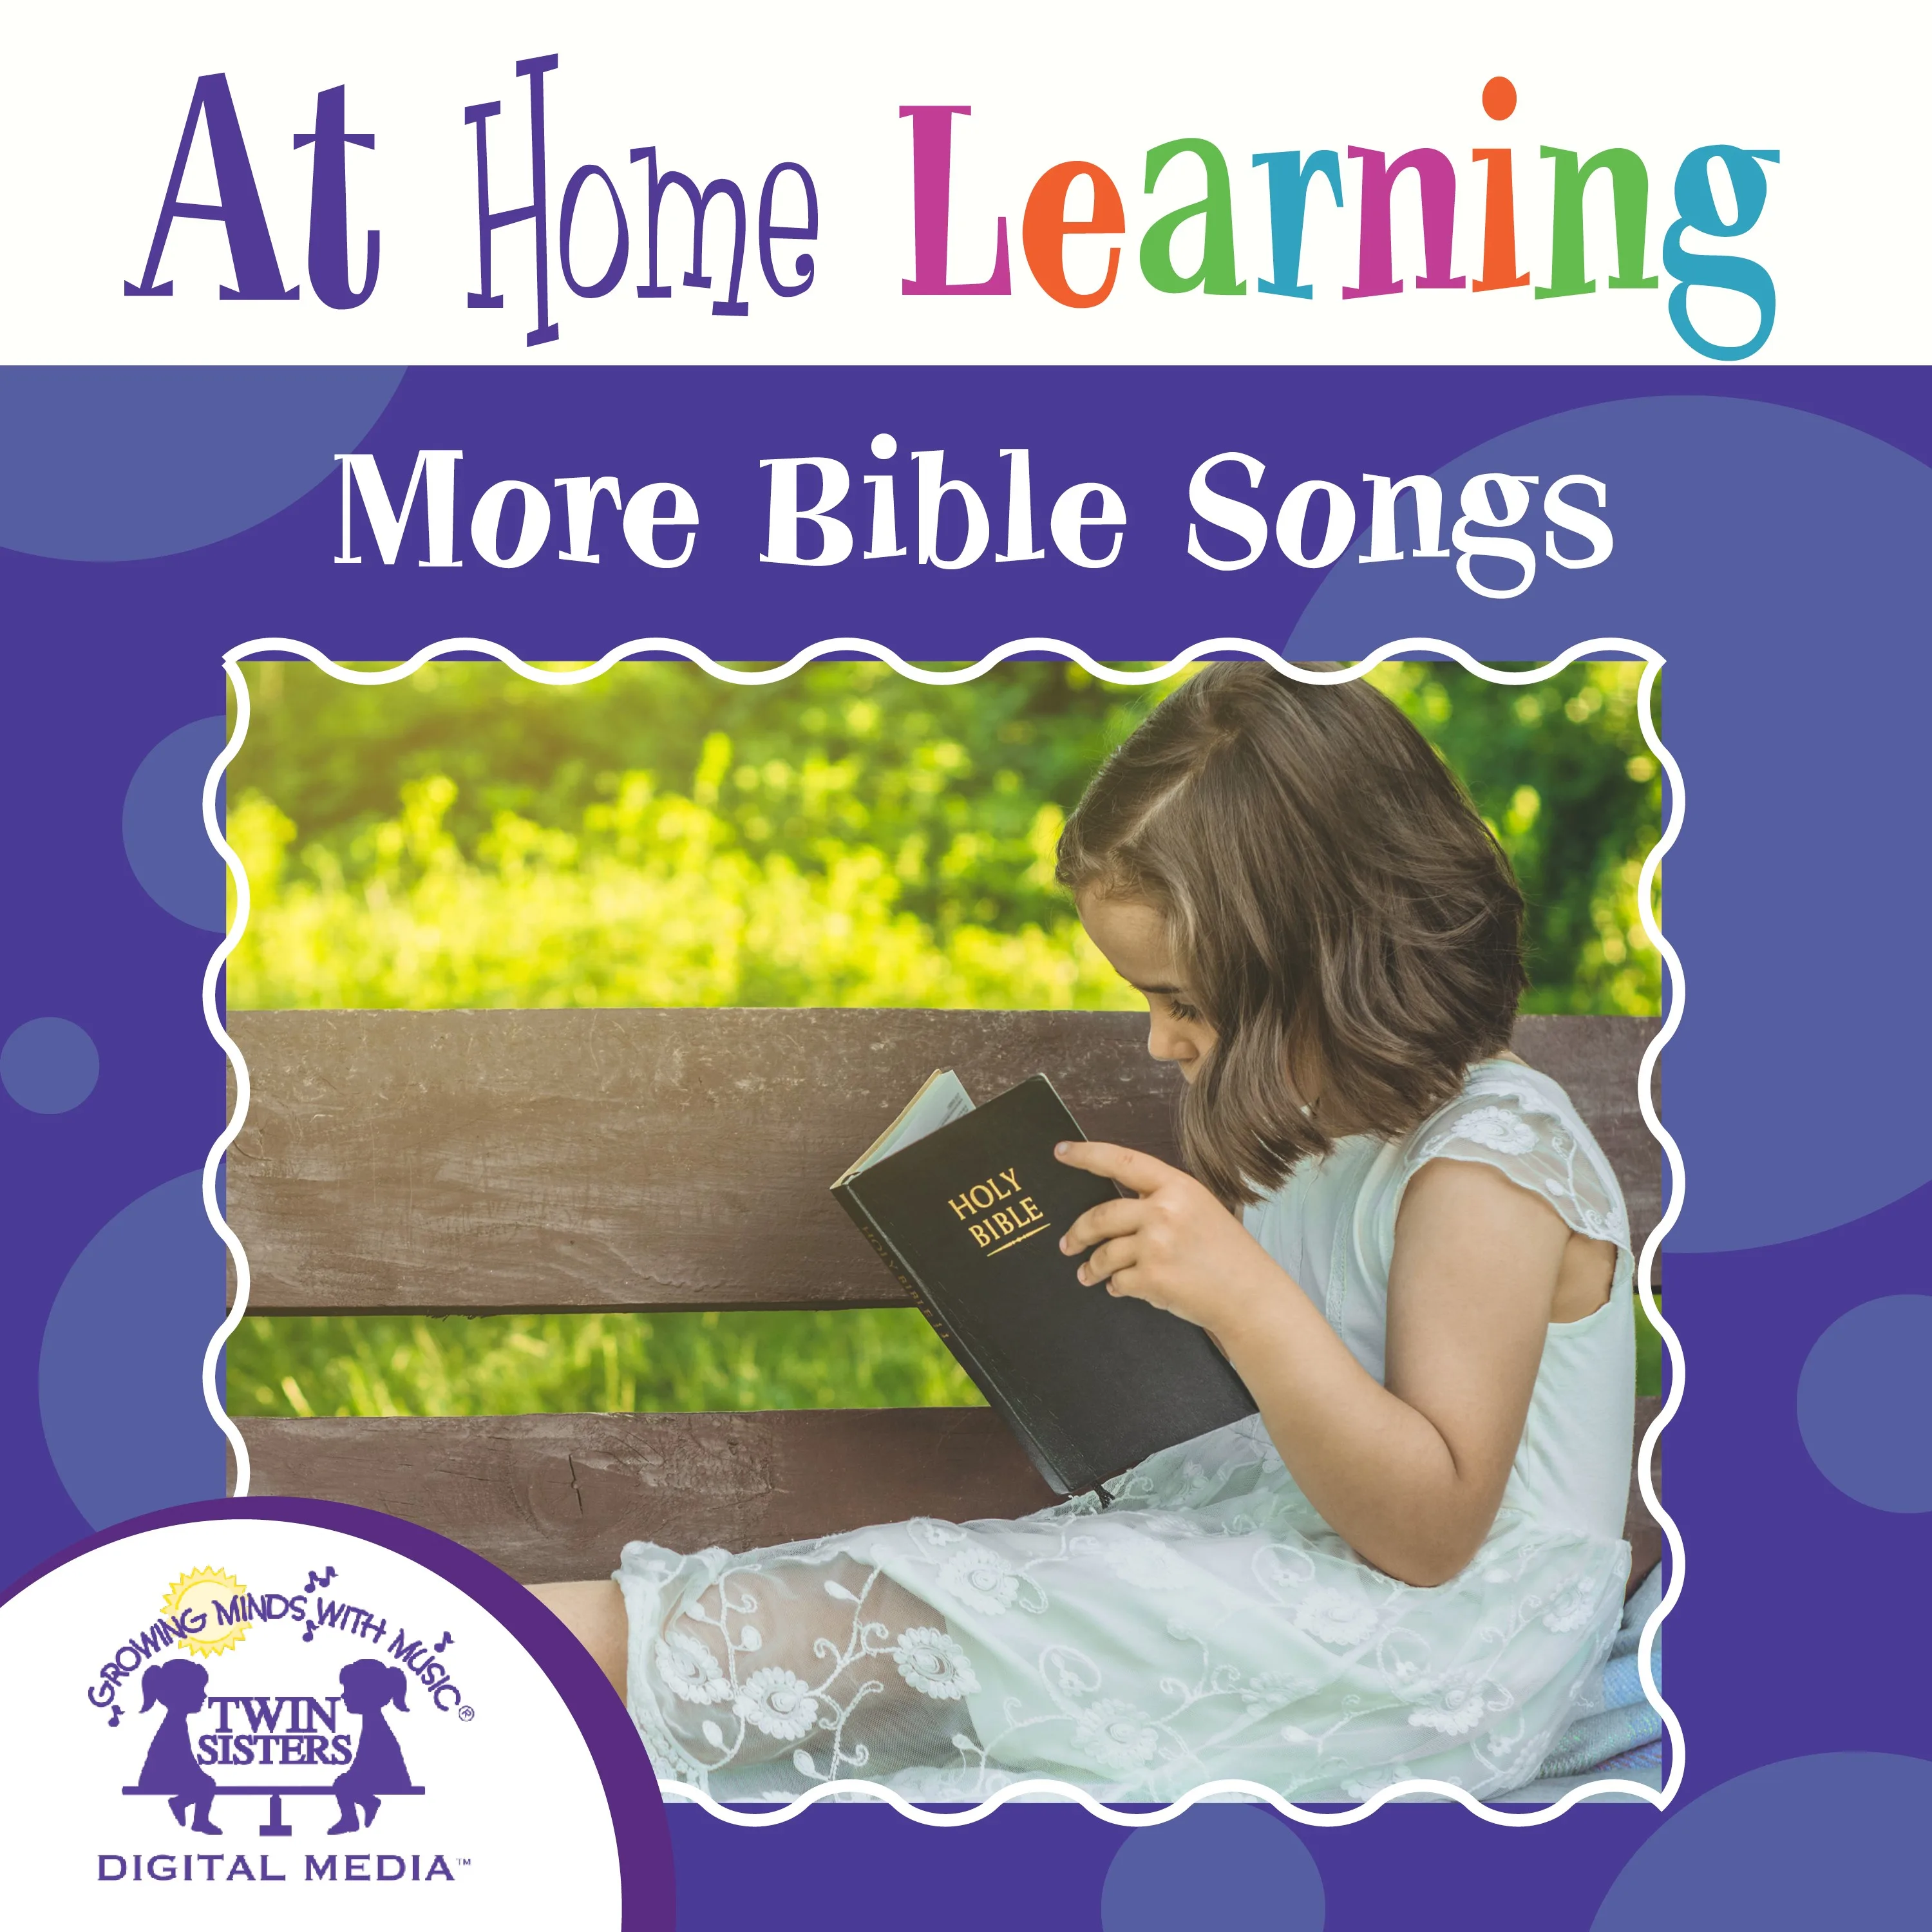 An educational teaching resource from Twin Sisters Digital Media entitled At Home Learning More Bible Songs downloadable at Teach Simple.